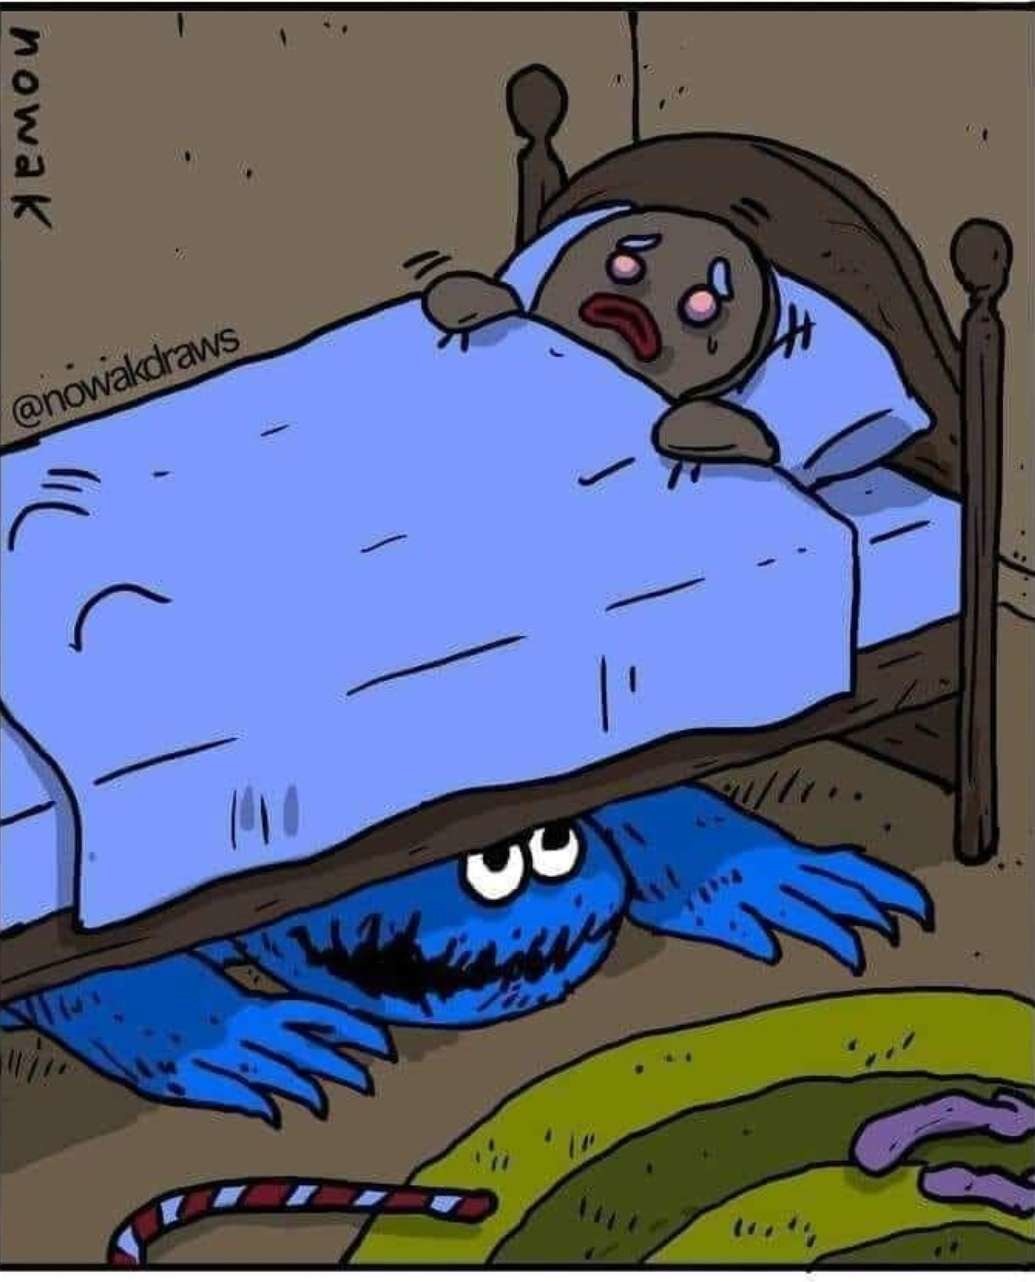 There's a monster under the bed - meme